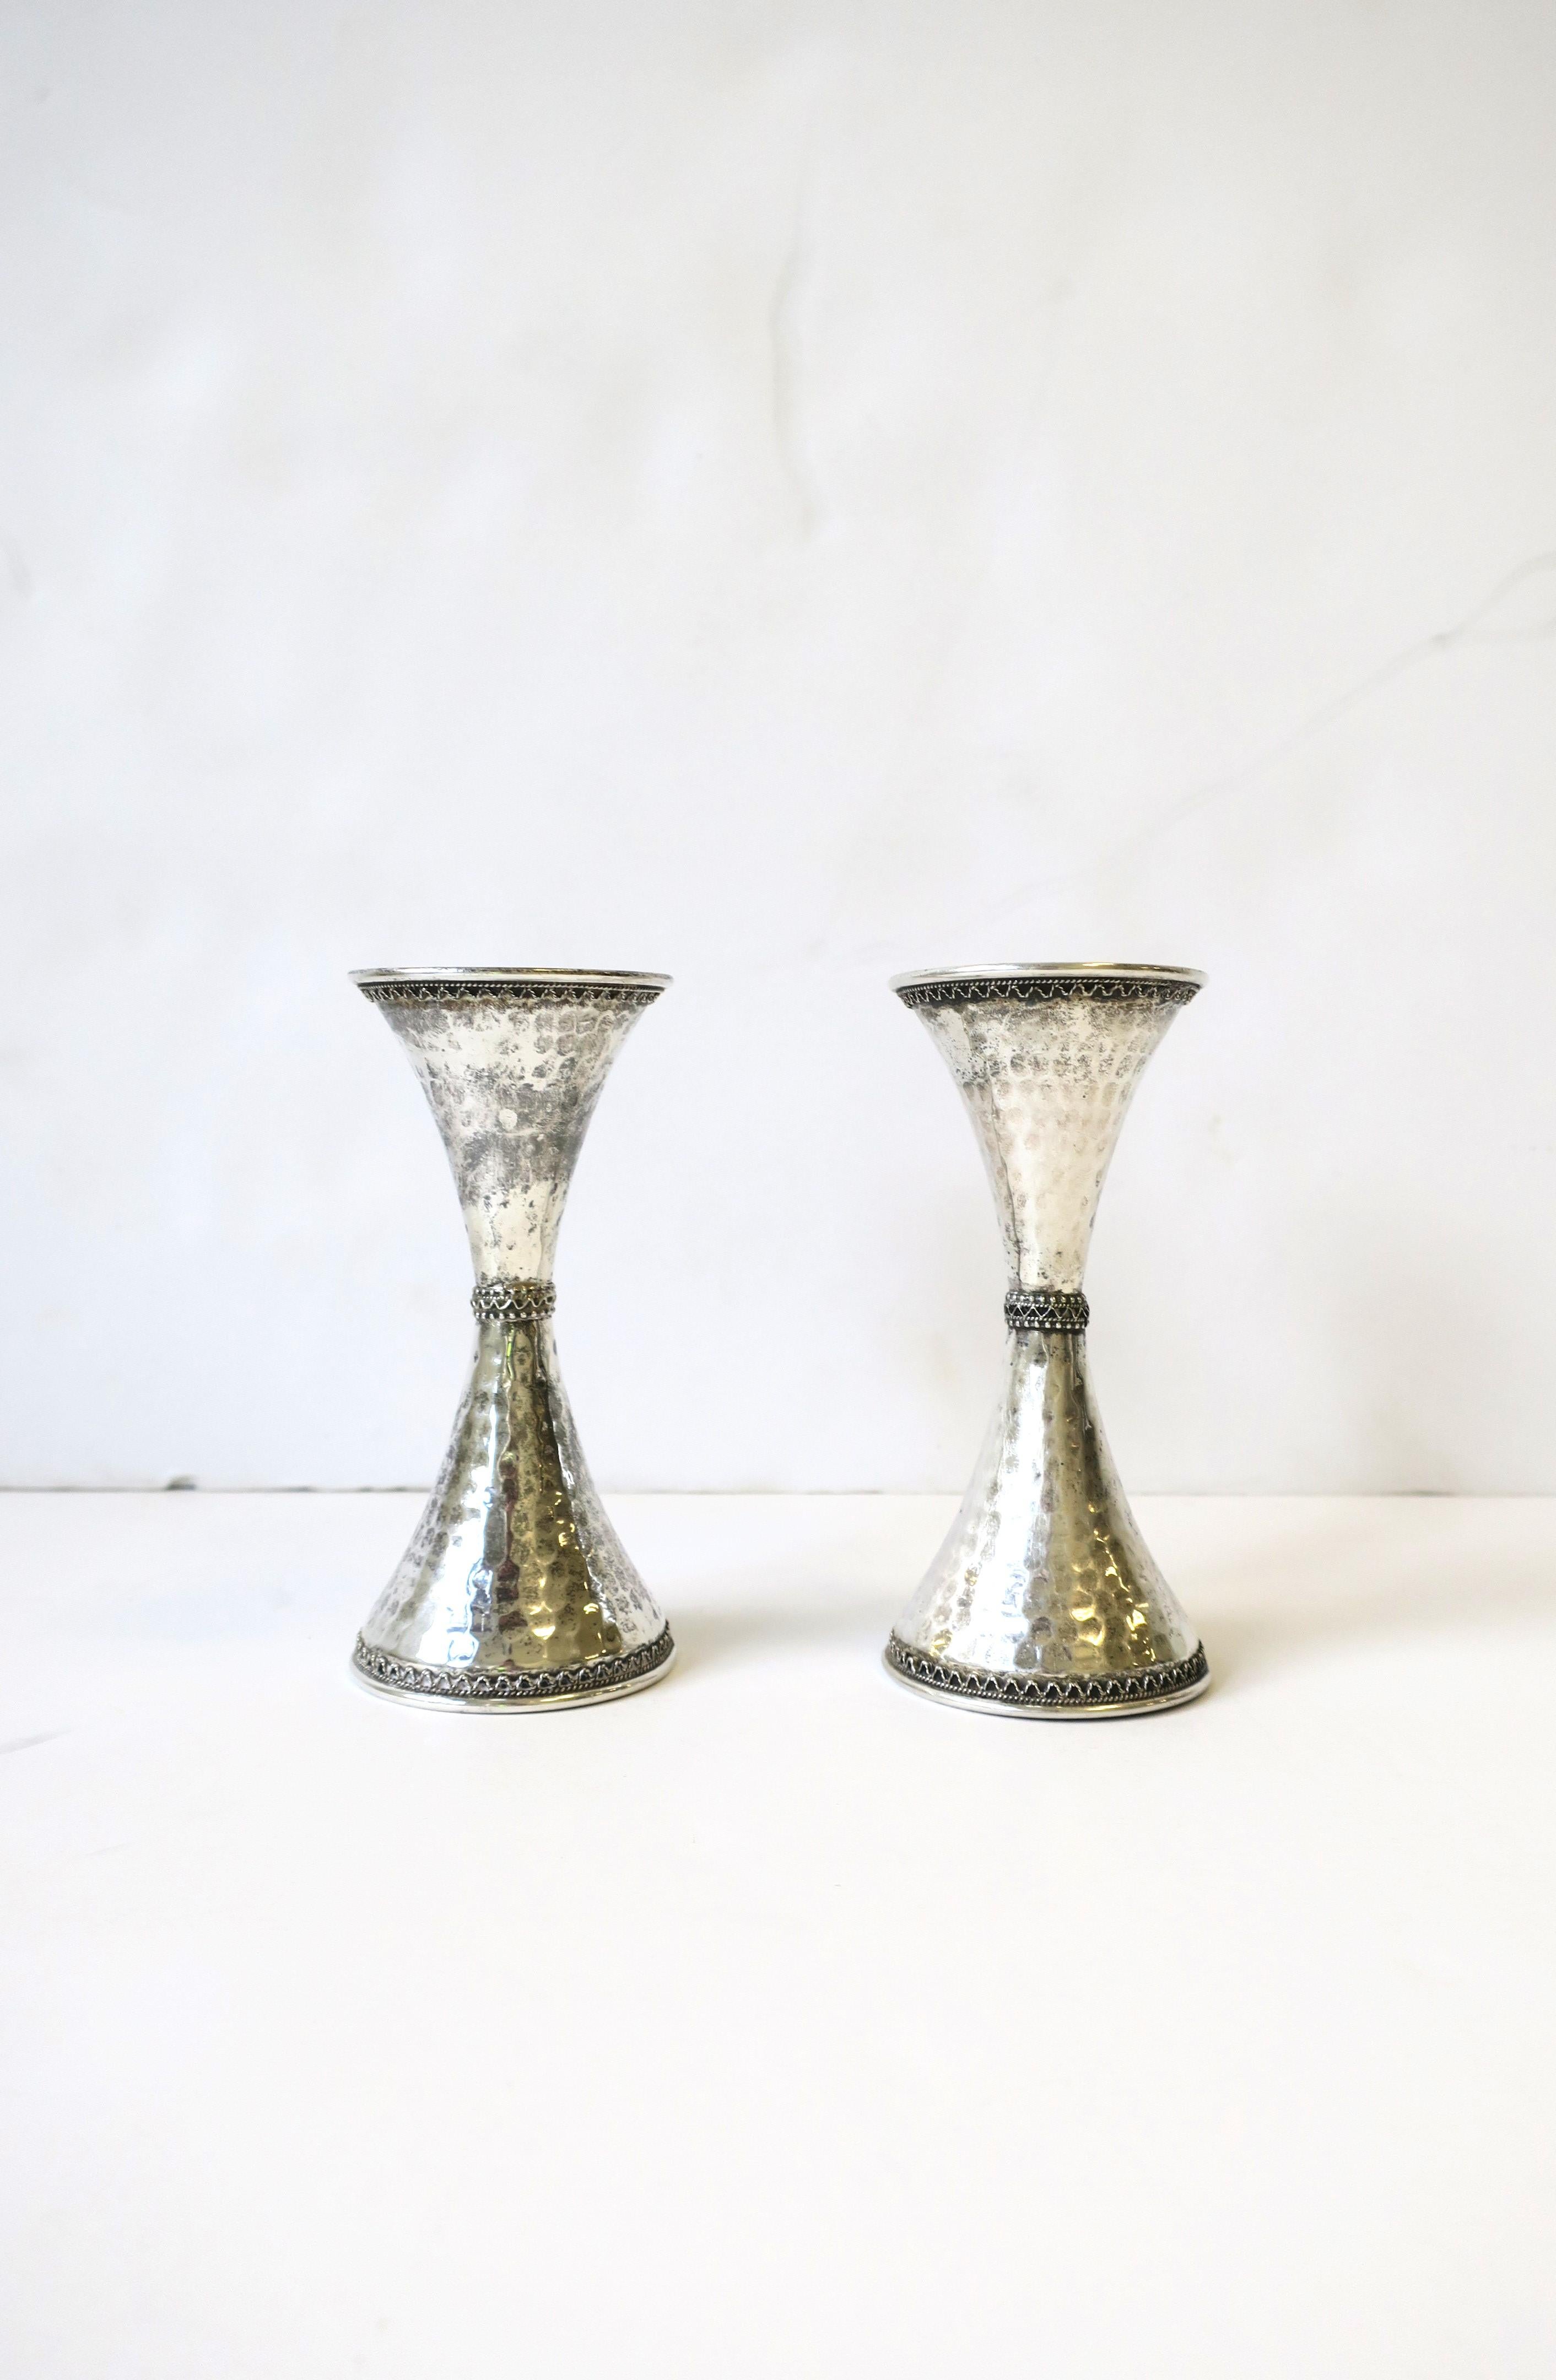 A beautiful pair/set of sterling silver candlestick holders, circa 20th century, Israel. Pair have an hourglass shape, hammered design and small intricate detail at top, center, and base area. Marked inside: 'Shevan Bros.' 'Sterling', '925', 'Made